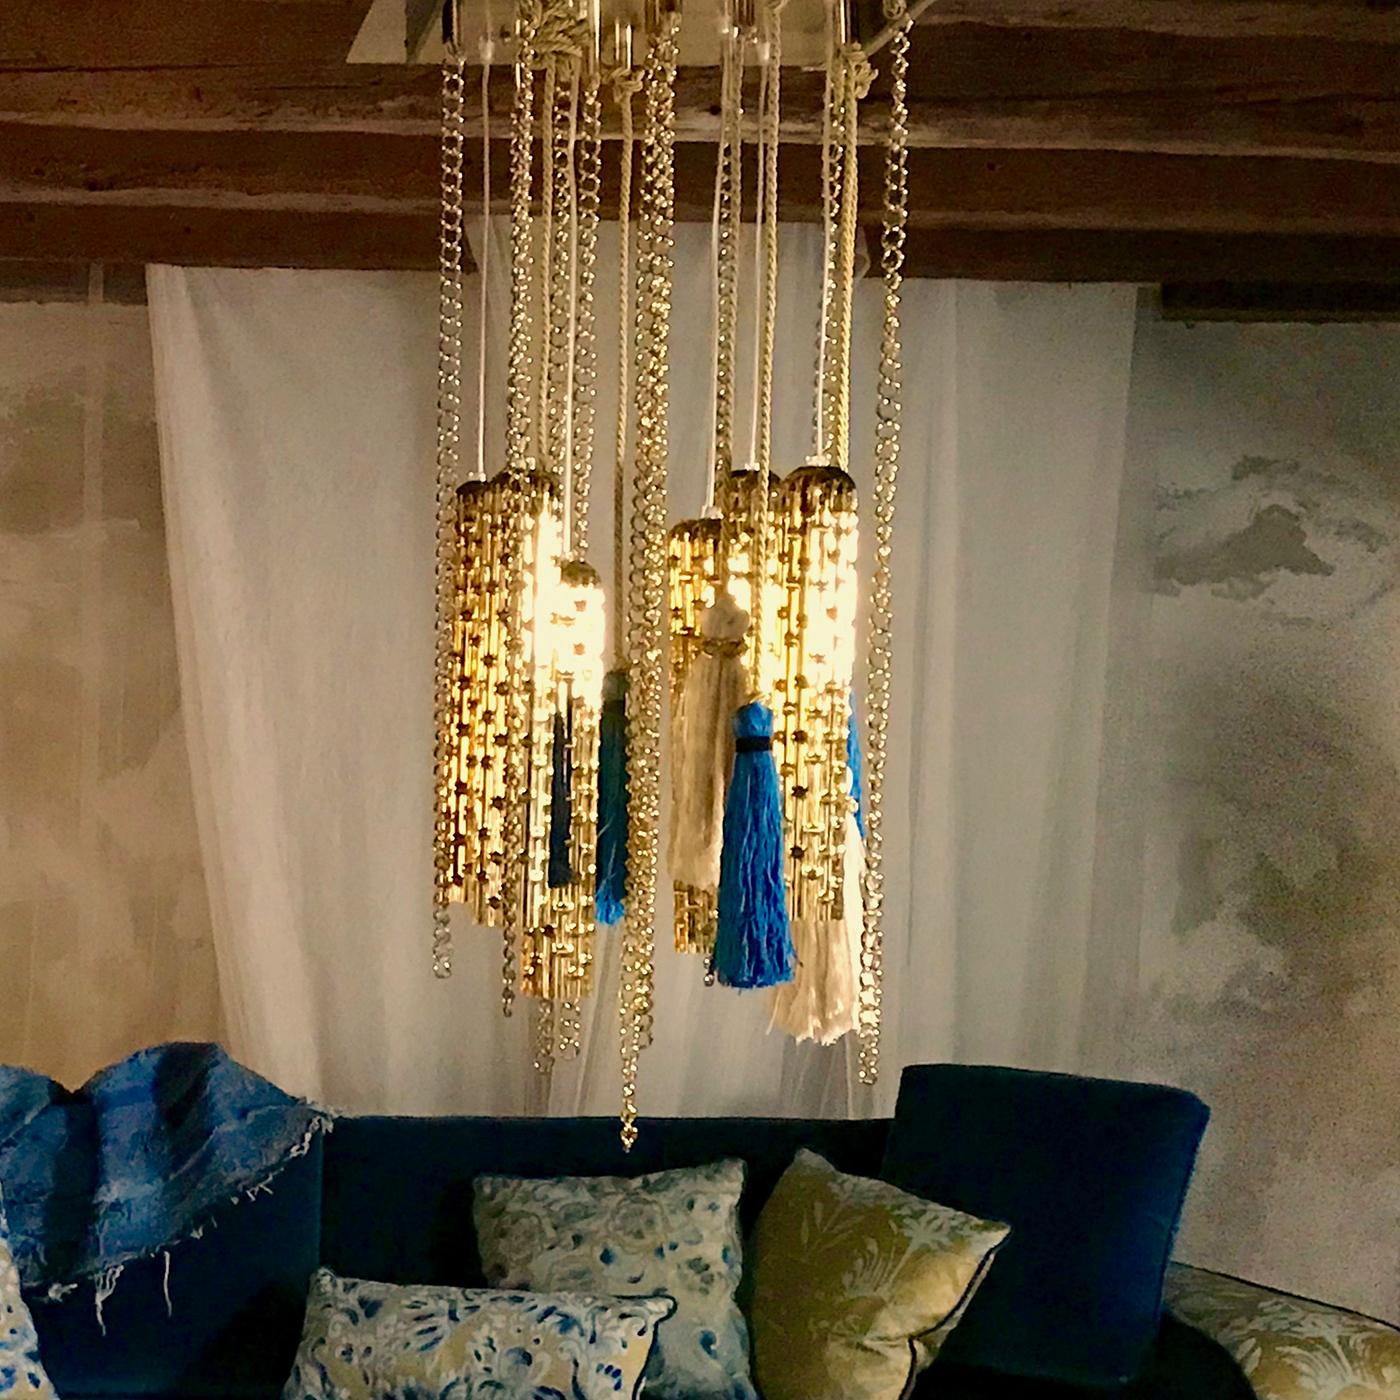 Designed by Slow+Fashion+Design and realized by Venetian artisans, this unique chandelier revisits the classic Murano glass style with a modern and unconventional twist. White, cobalt and gold silk tassels, golden chains, and elaborately decorated